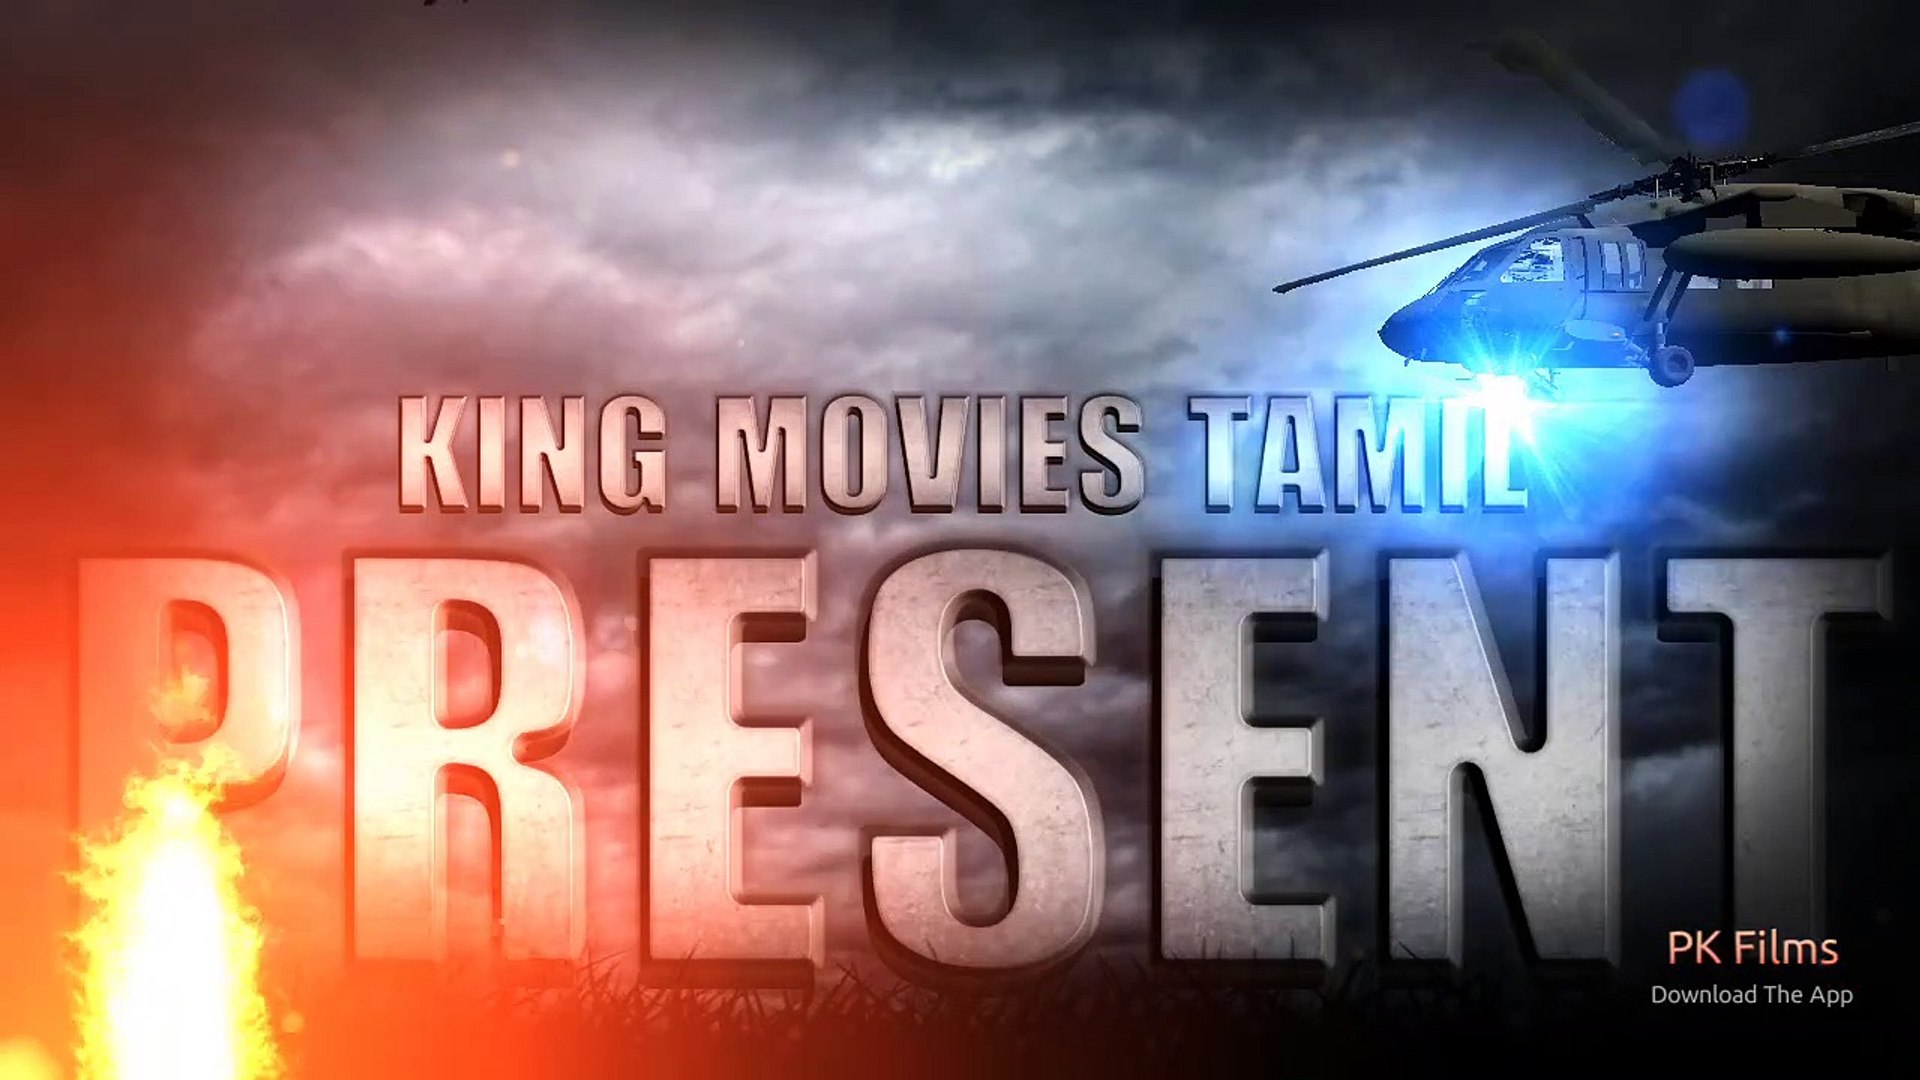 ⁣KING MOVIES TAMIL present a new video army movies.